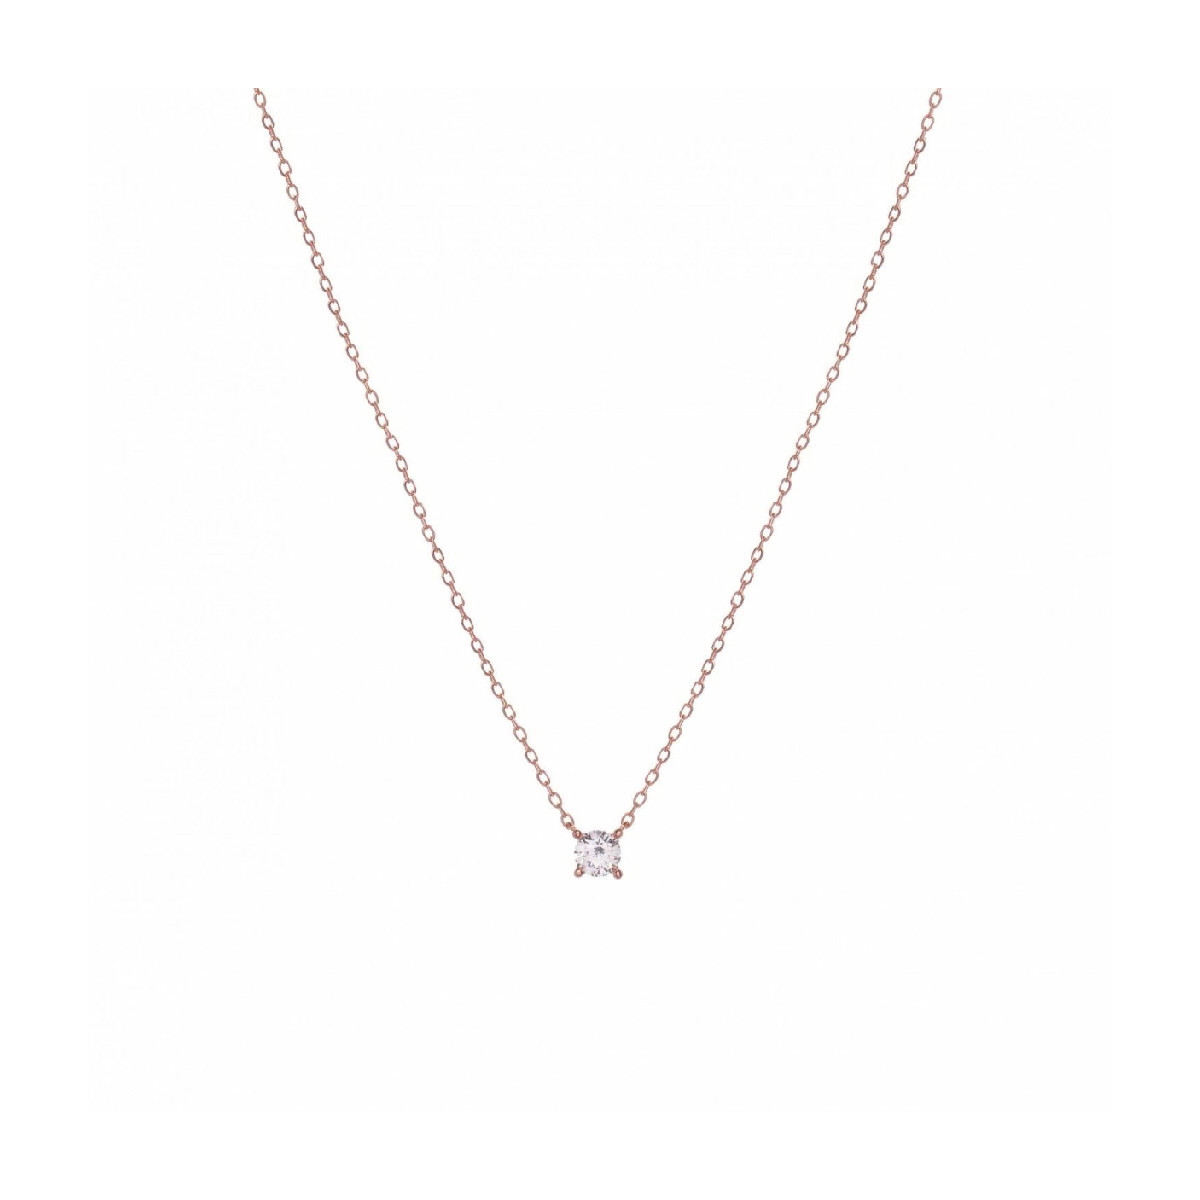 COLLAR LINEARGENT - 18555-R-PE